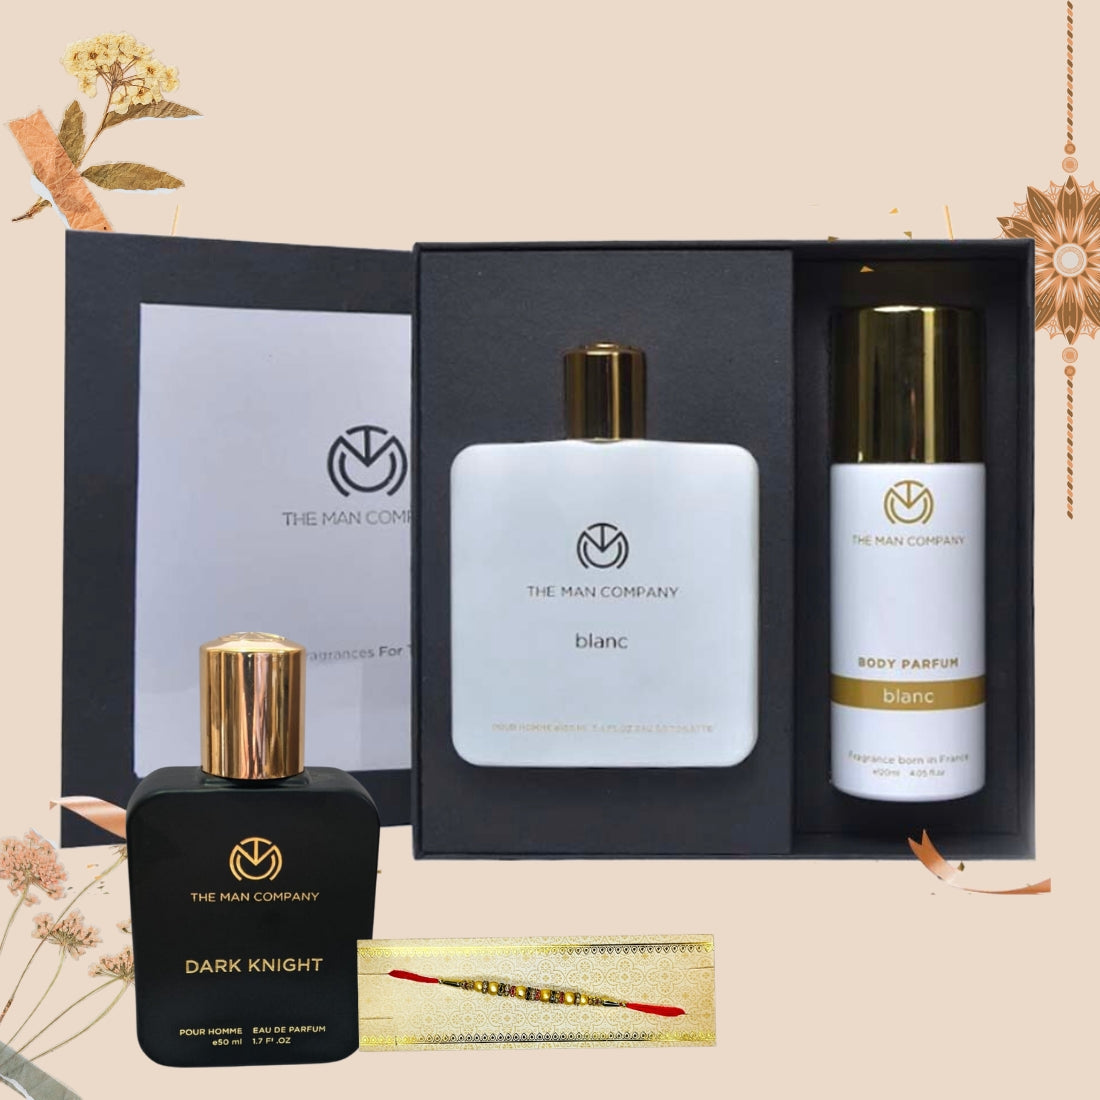 Every Sister Should Get These Grooming Gifts For Her Lazy Brother This Rakhi